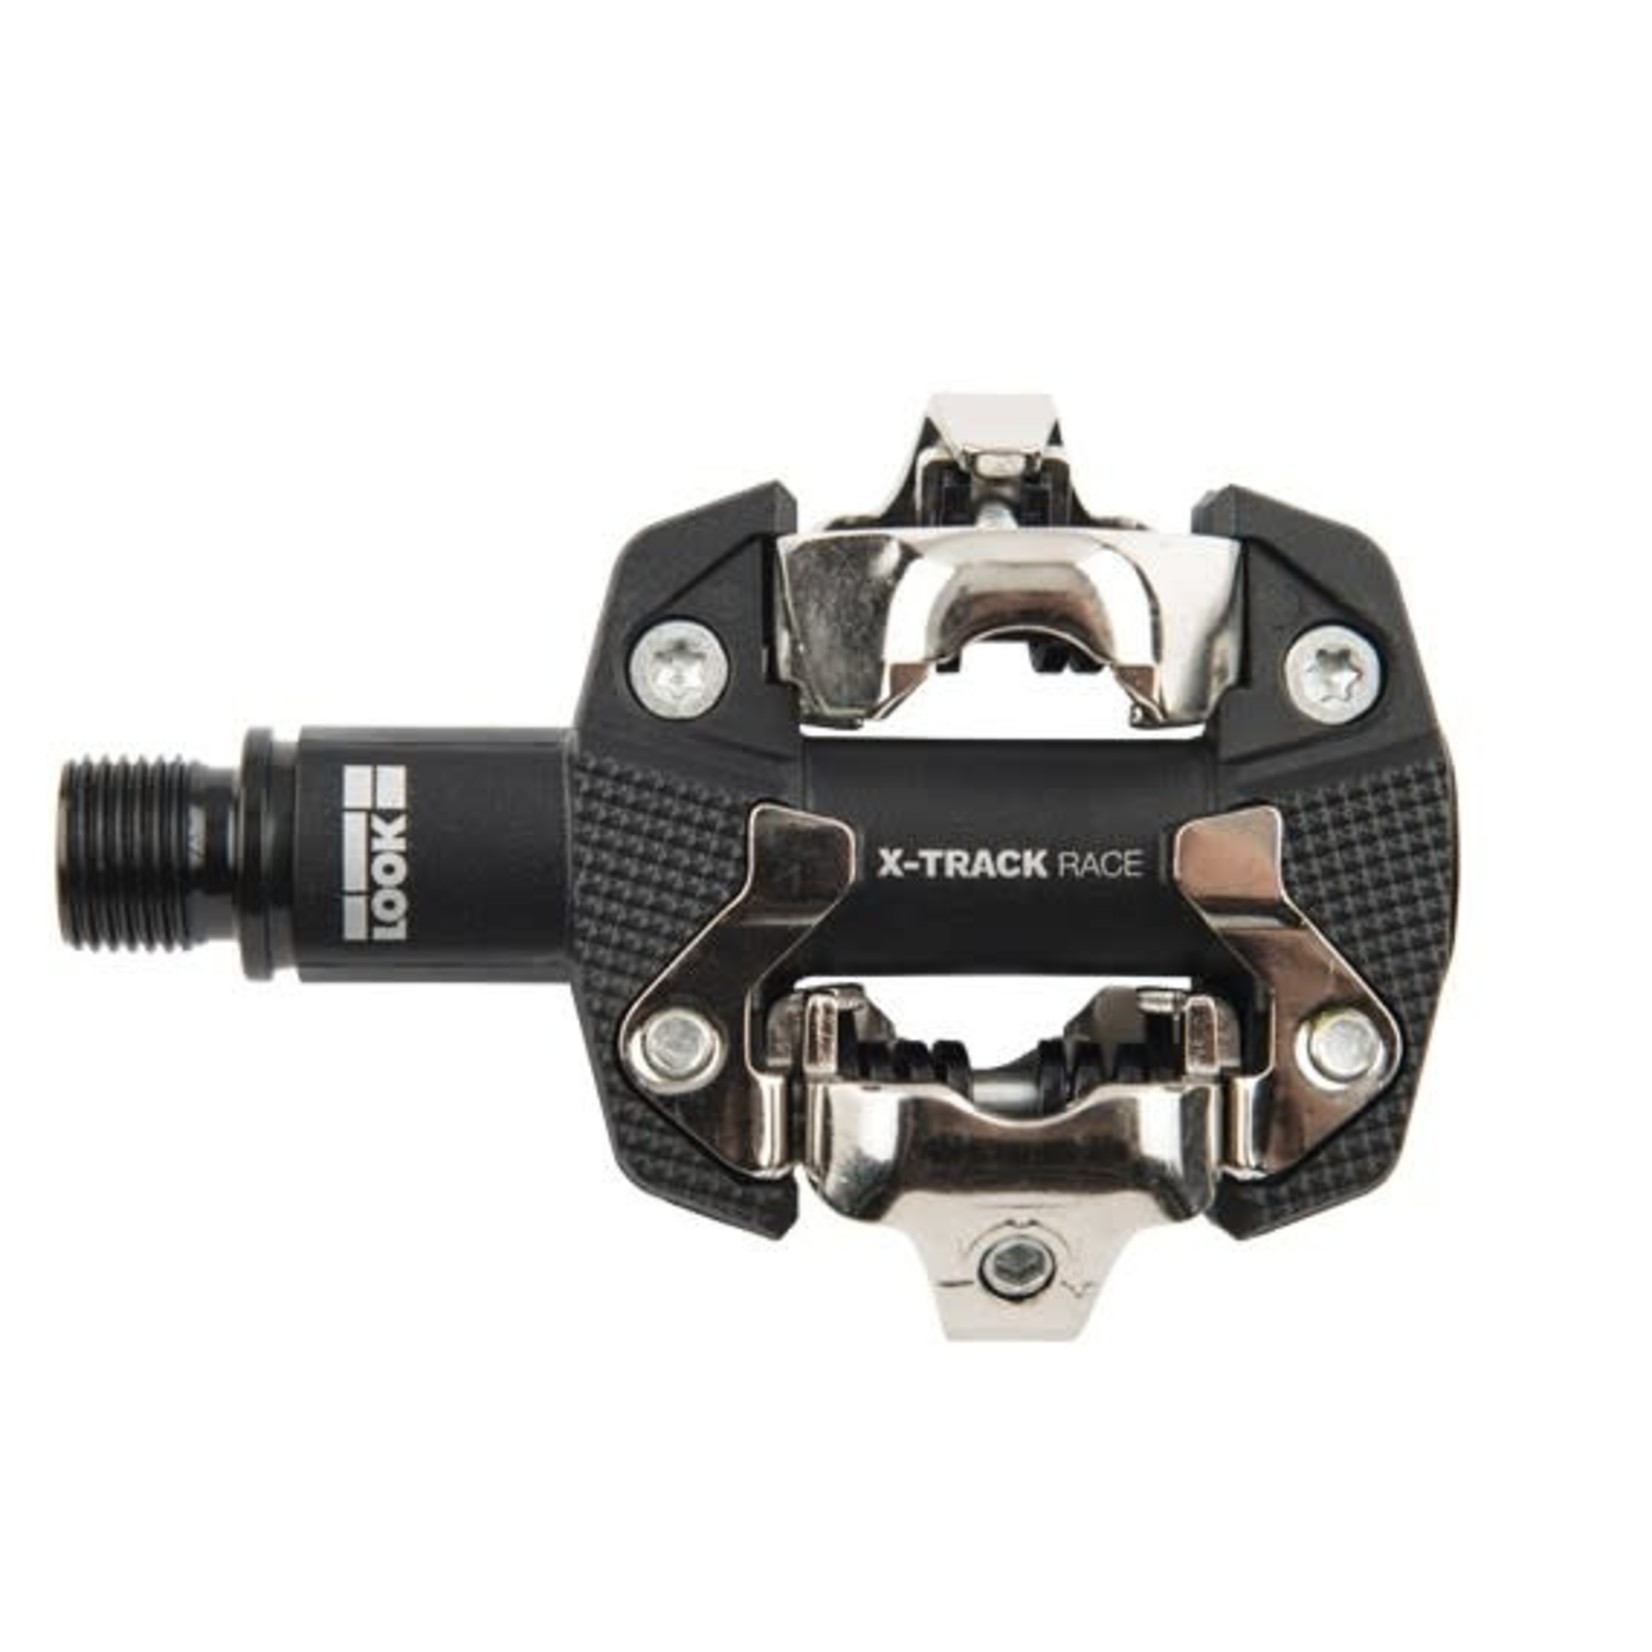 Look Look X-Track Race Cr-Mo MTB Pedals